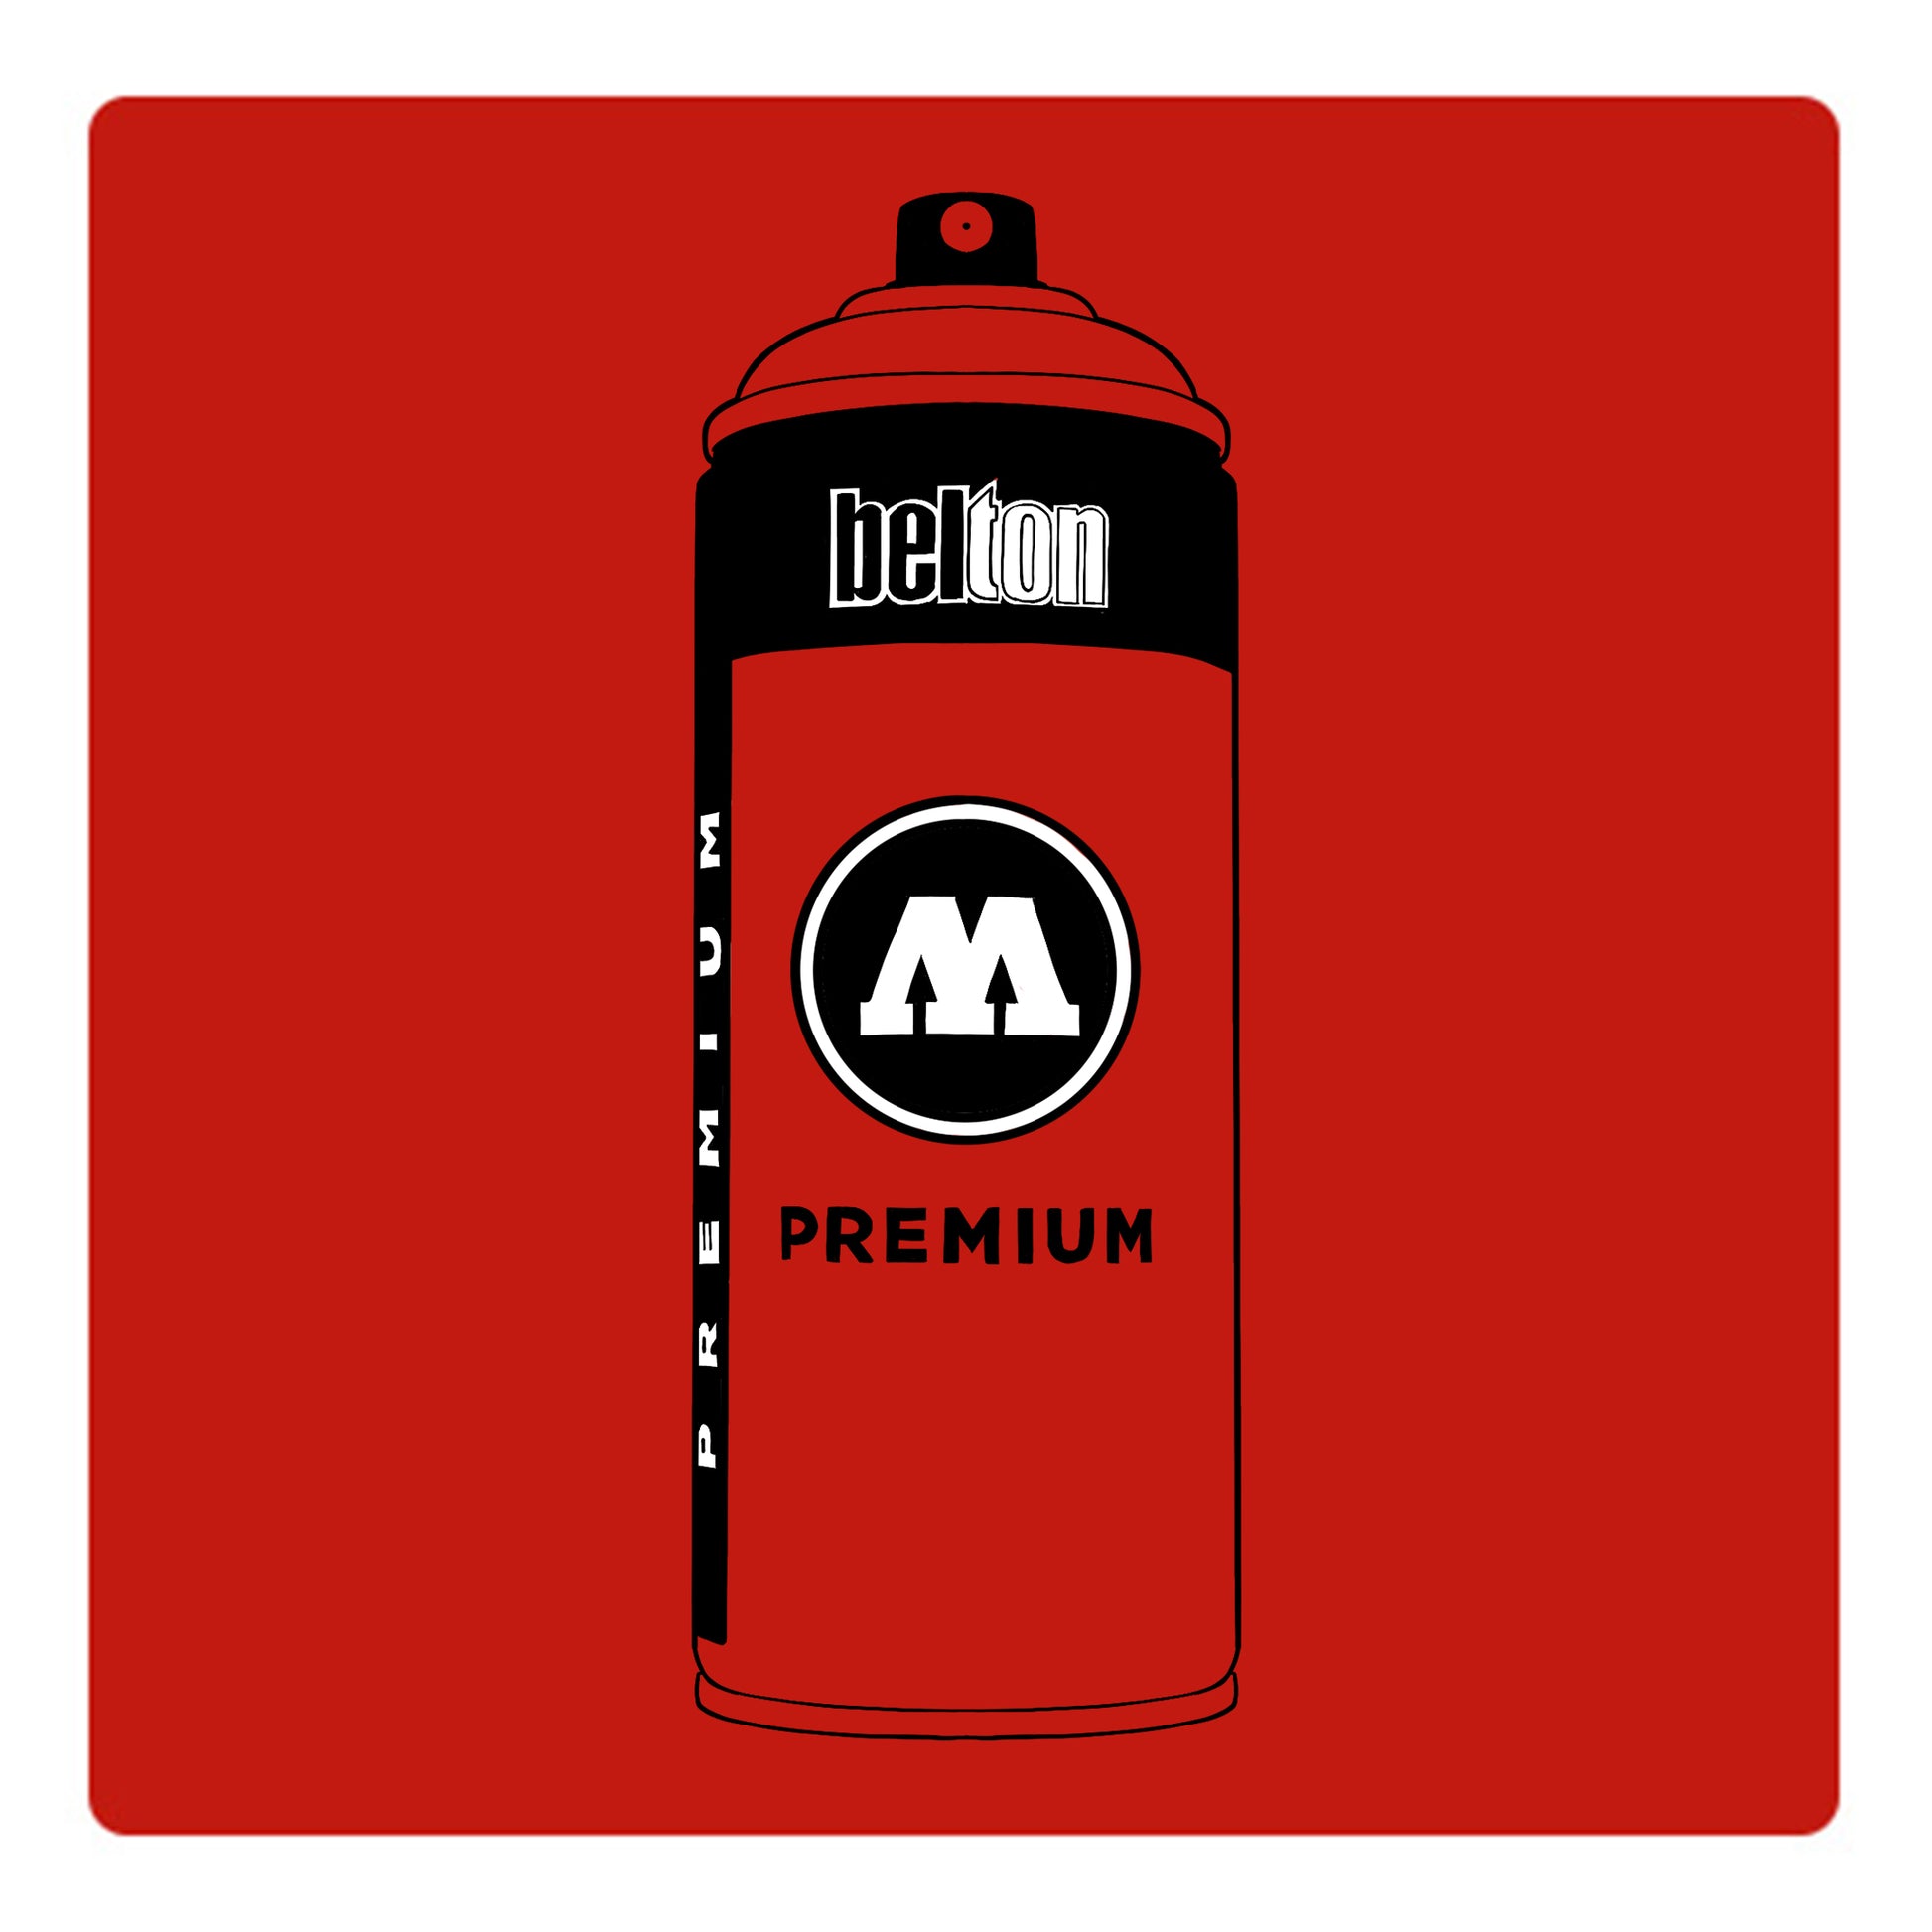 A black outline drawing of a red orange spray paint can with the words "belton","premium" and the letter"M" written on the face in black and white font. The background is a color swatch of the same red orange with a white border.